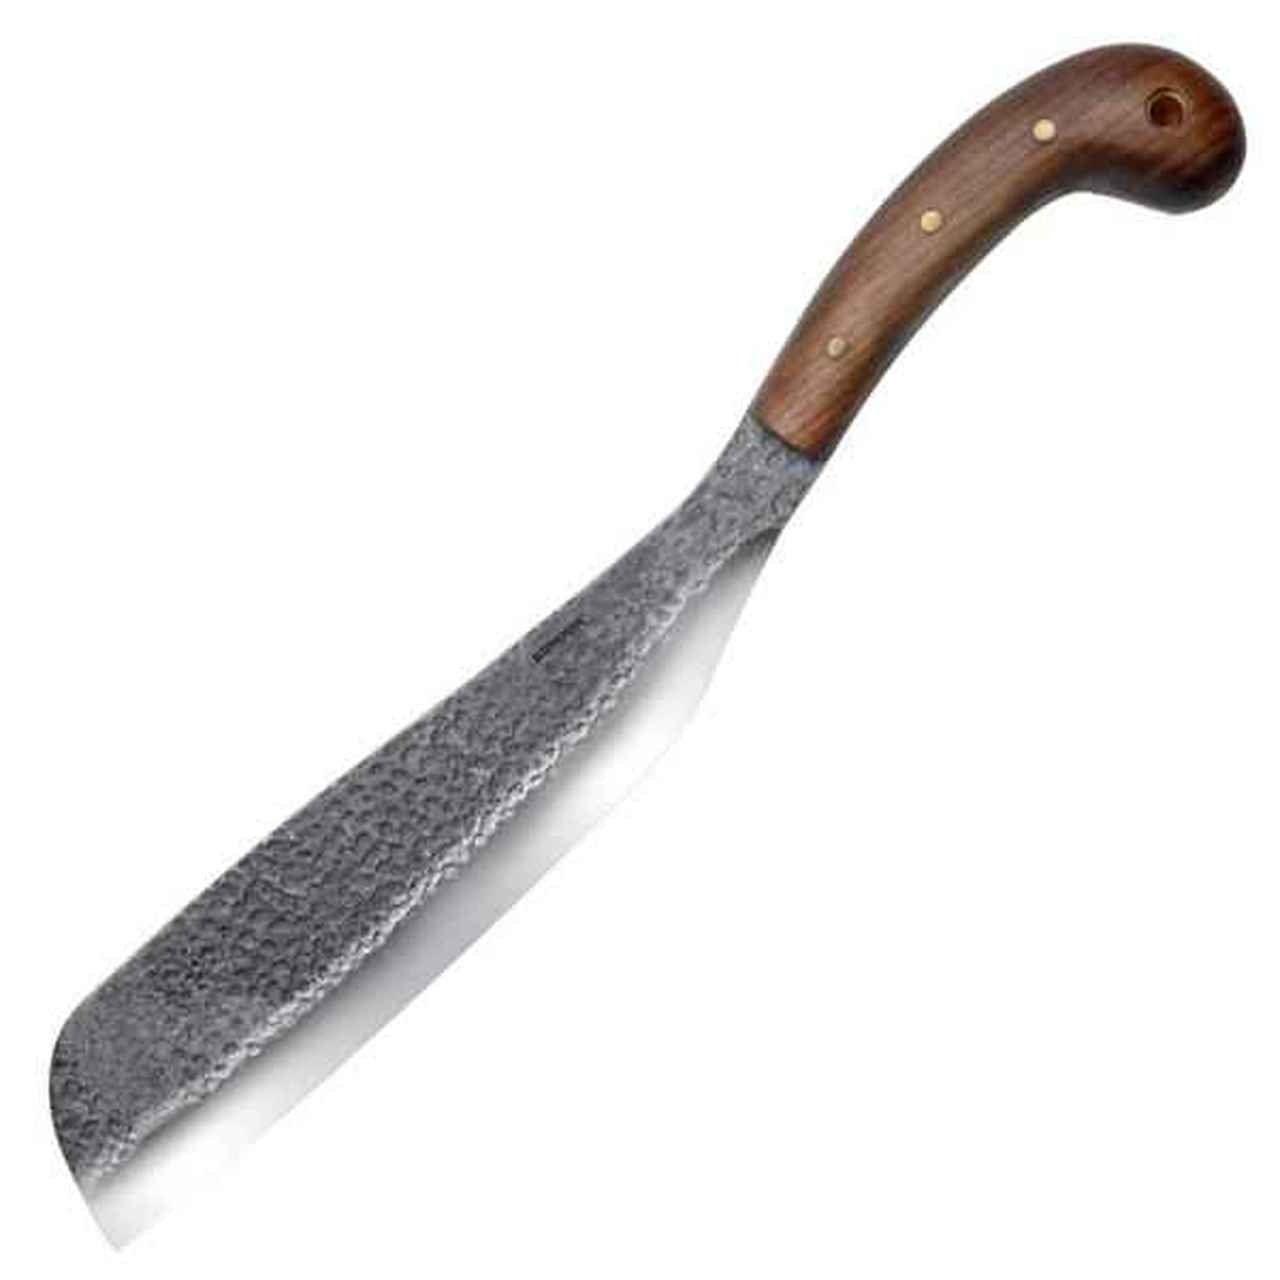 Condor 'Village Parang' Machete - 18" Overall, w/ Brown Leather Sheath @knifeworks $66.95